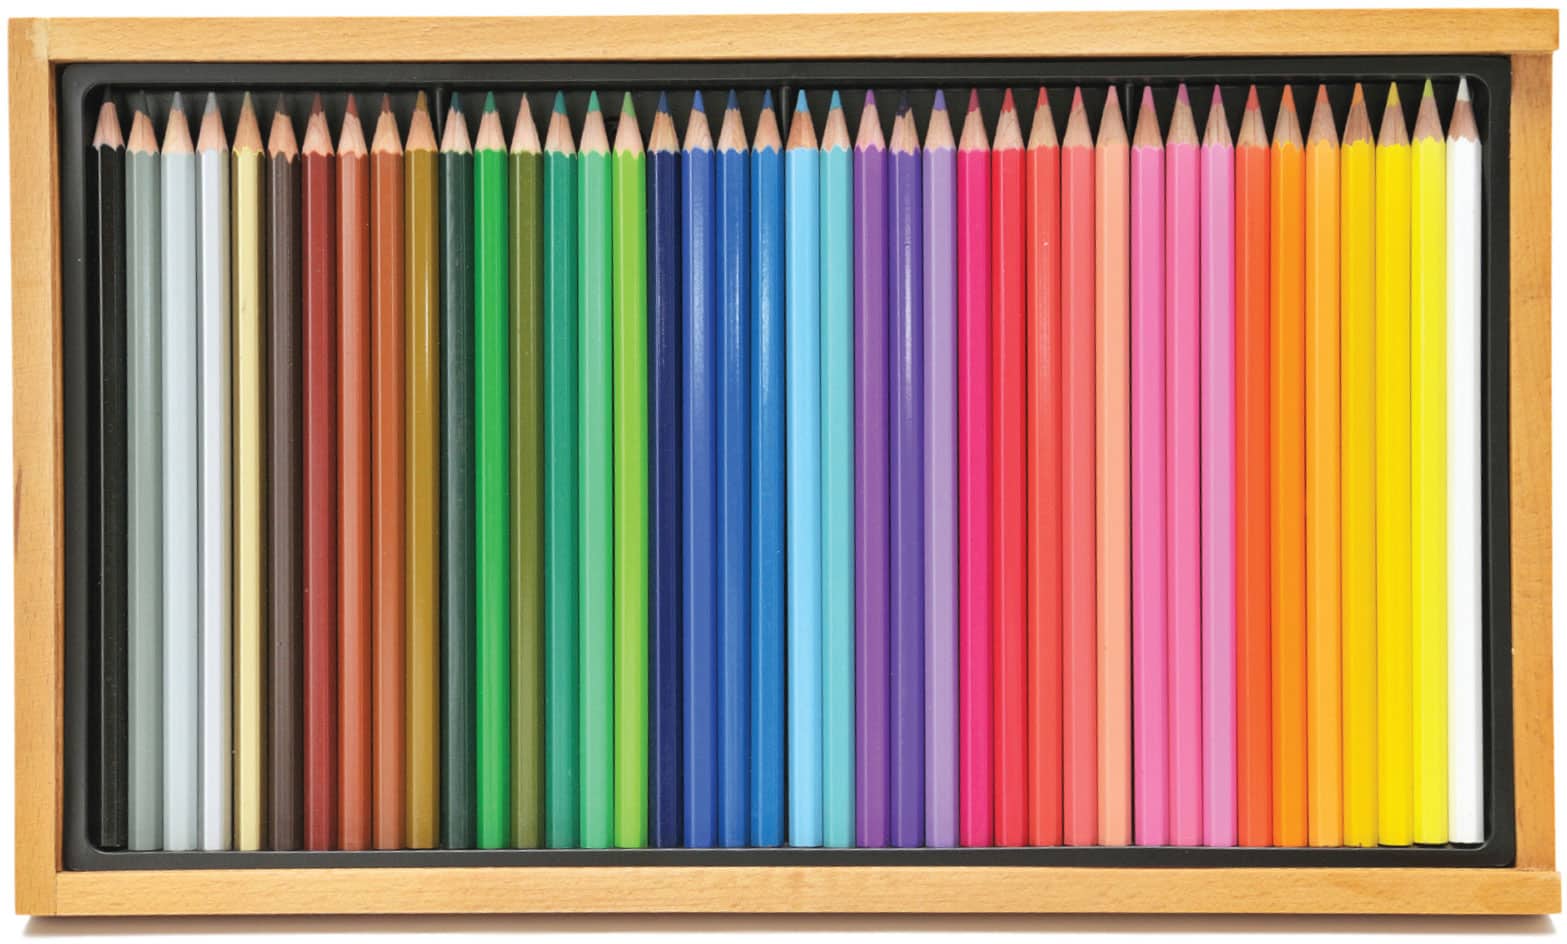 Wax-based pencils vs oil-based pencils - Which is better?